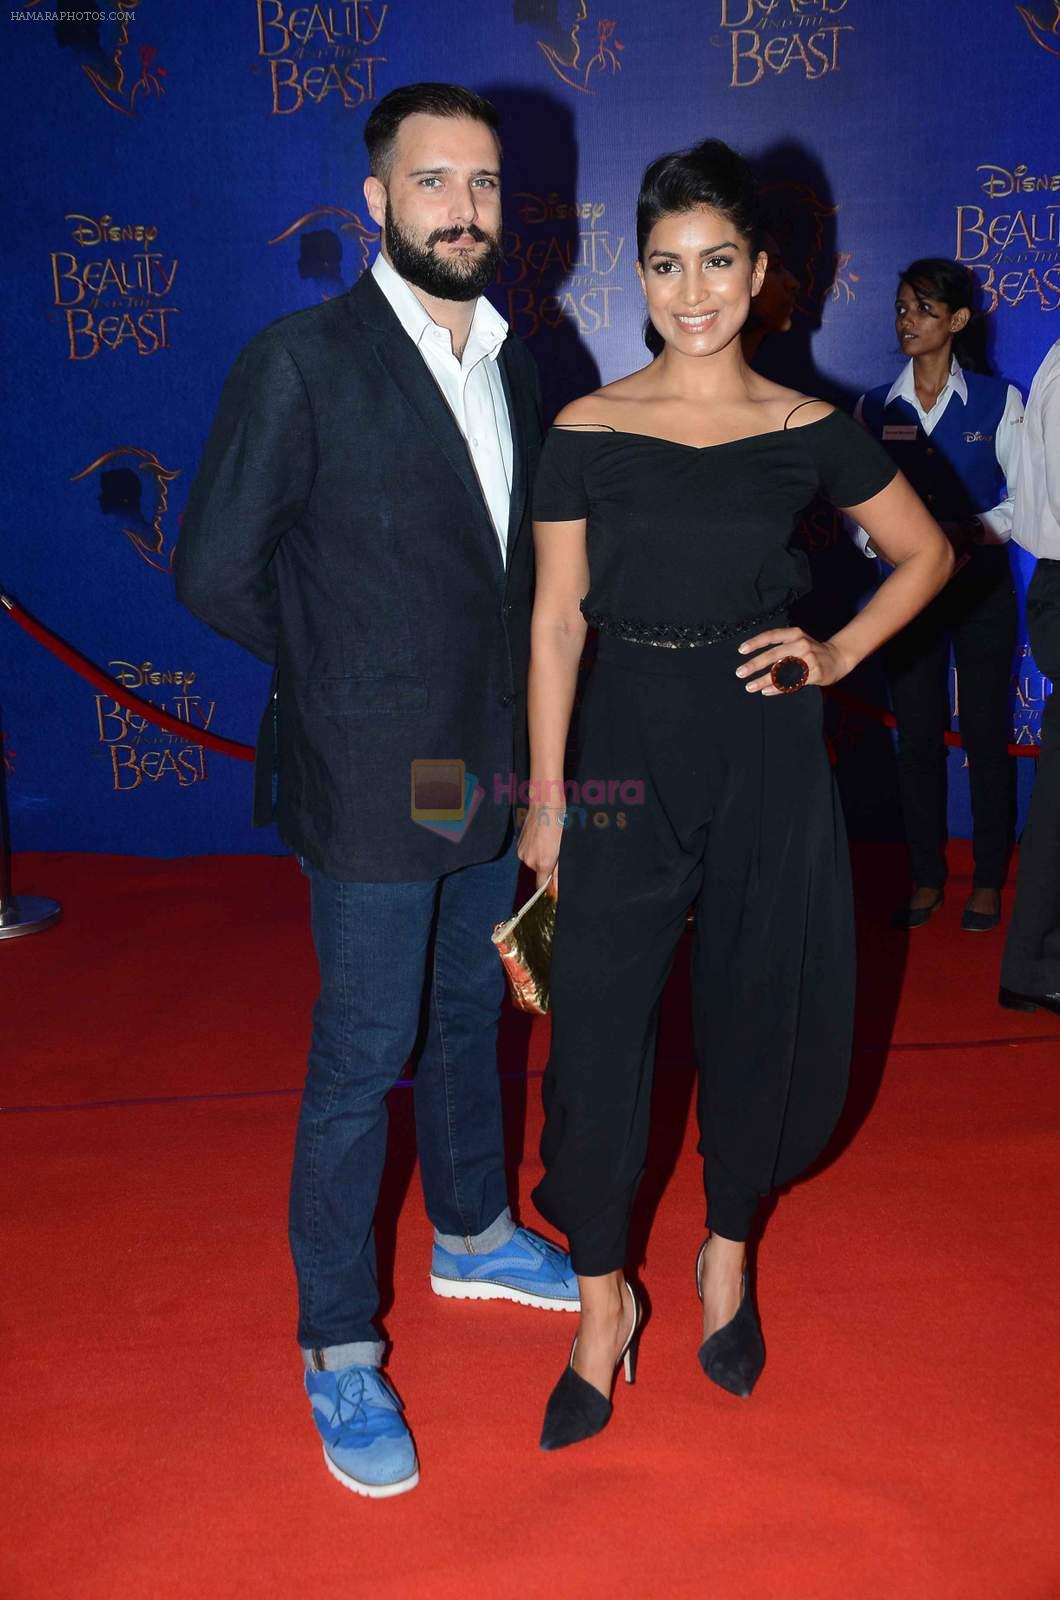 Pallavi Sharda at Beauty and the Beast red carpet in Mumbai on 21st Oct 2015